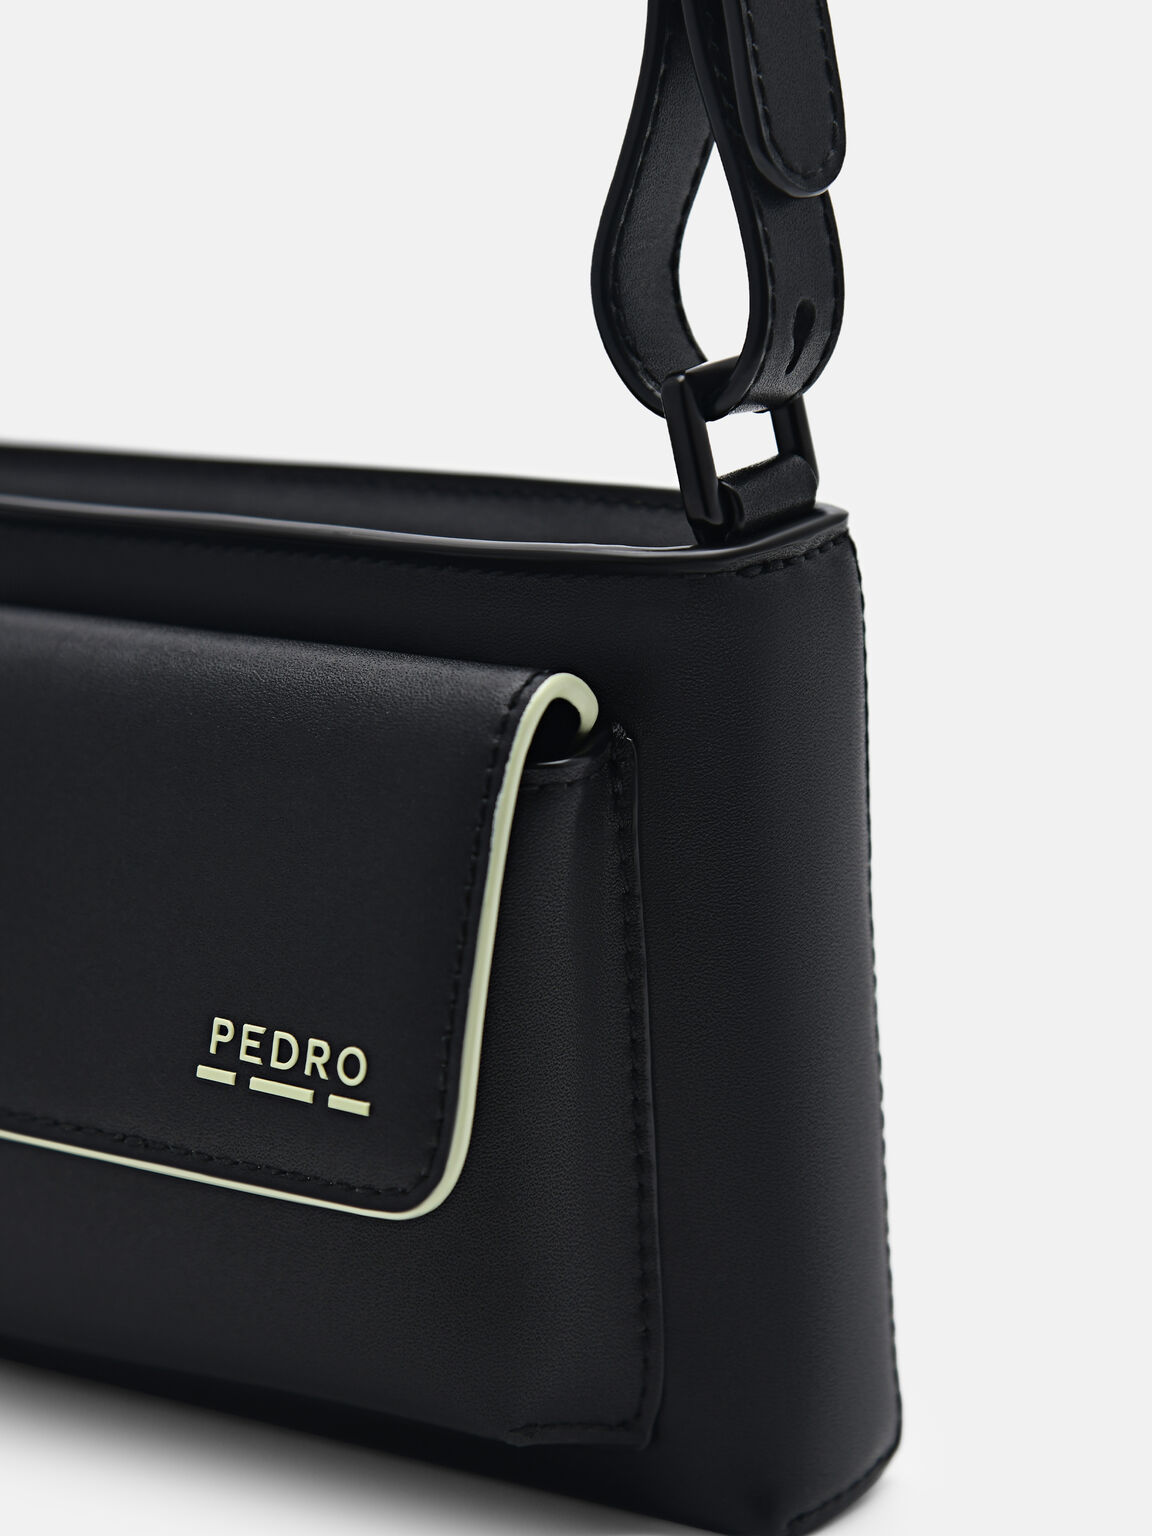 rePEDRO Recycled Leather Mini Sling Bag, Black, hi-res